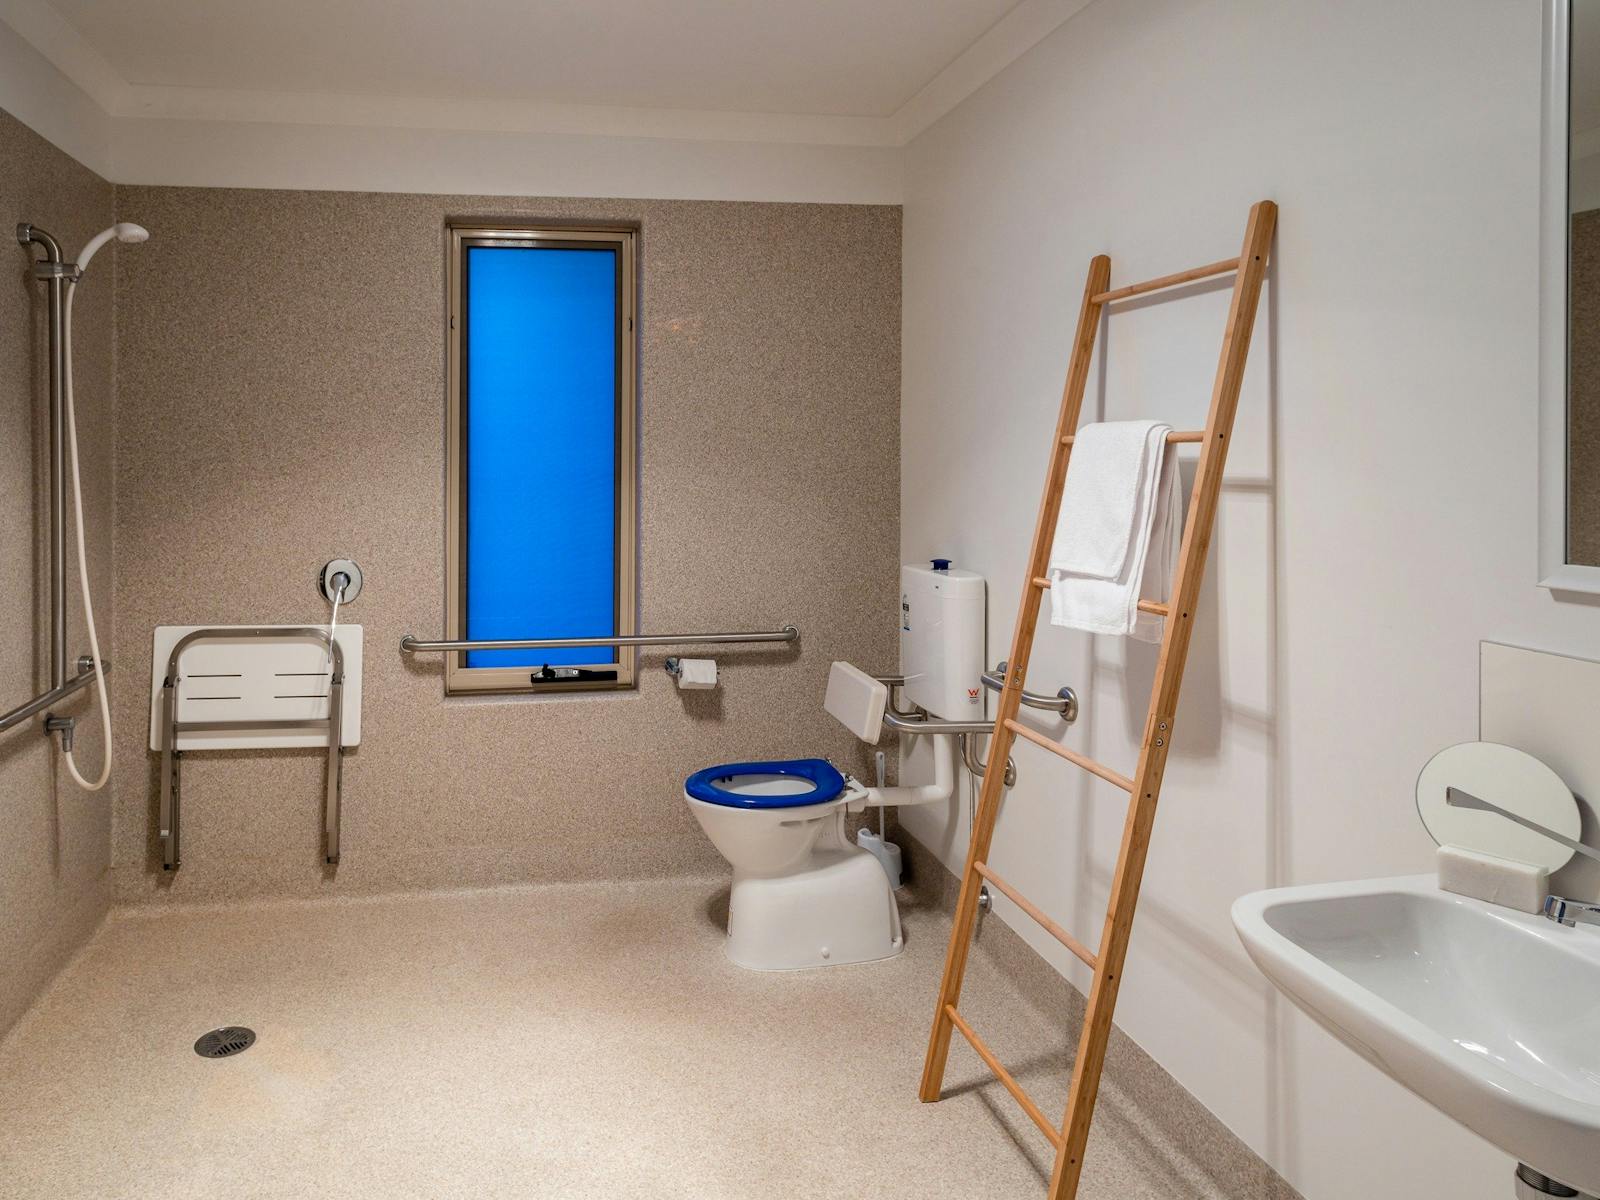 The main bathroom has an open shower space with grab rails and seat, toilet with grab rails basin..